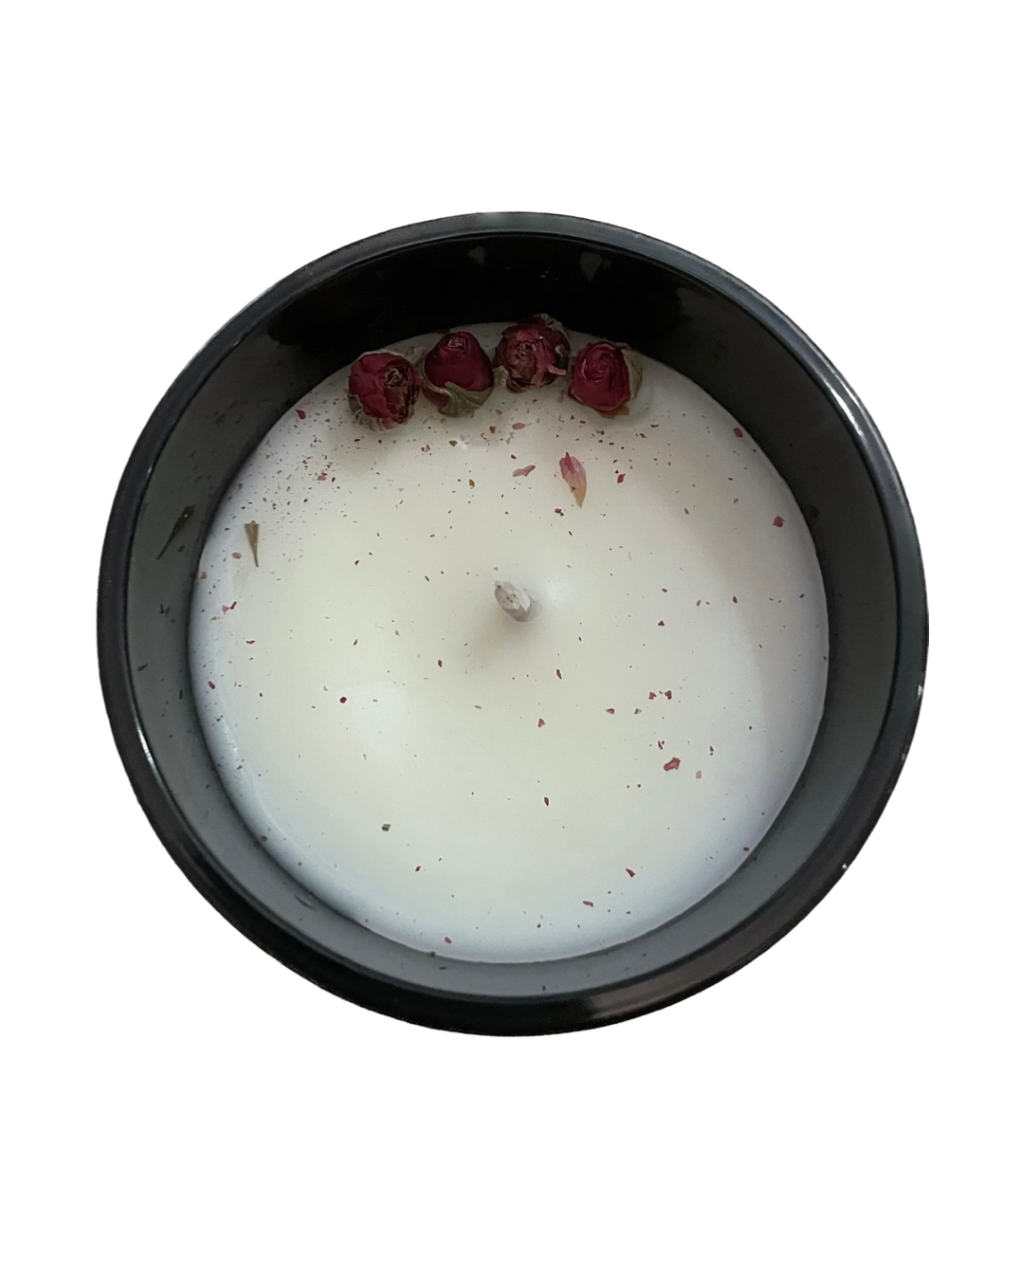 Silk Lace & Oud Handmade Sustainable Non-Toxic Candle